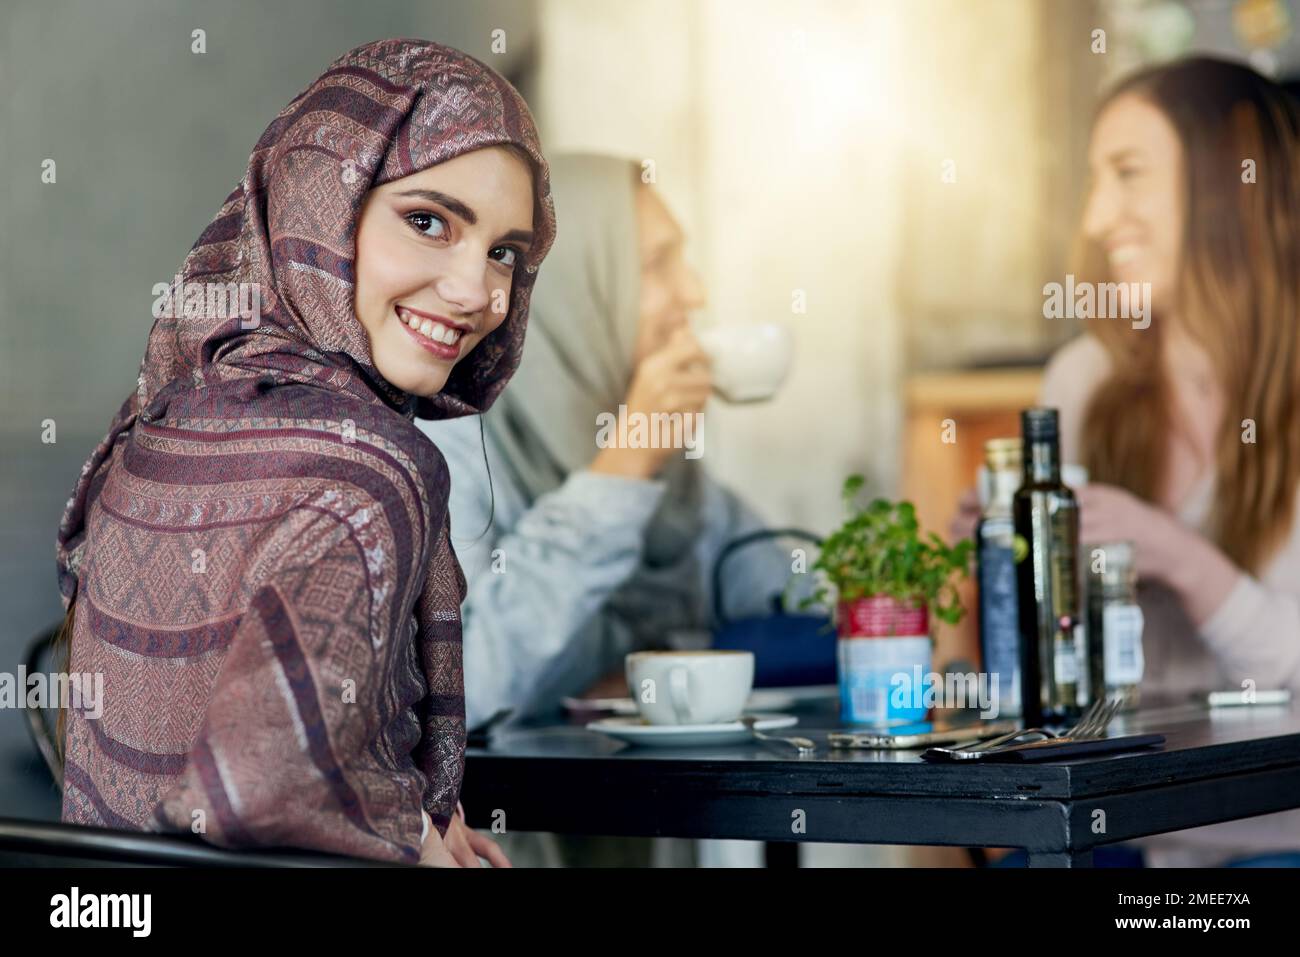 Anyone who loves coffee is a friend of mine. Portrait of a happy young woman spending time with her friends in a cafe. Stock Photo